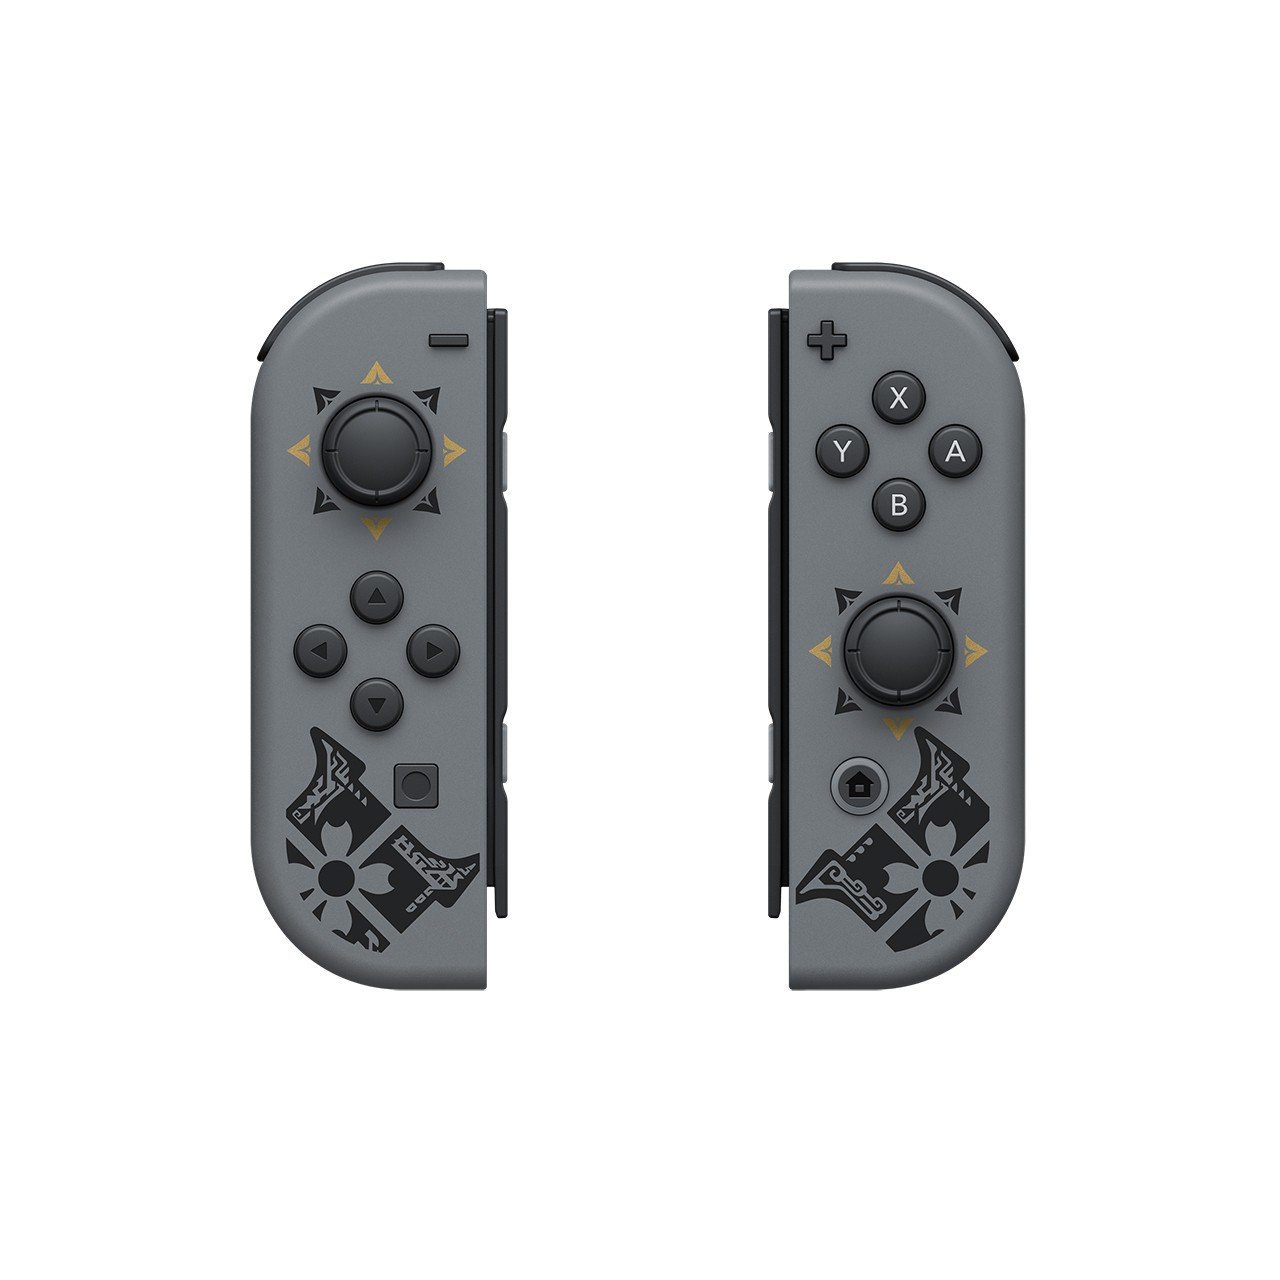 switch pro controller editions